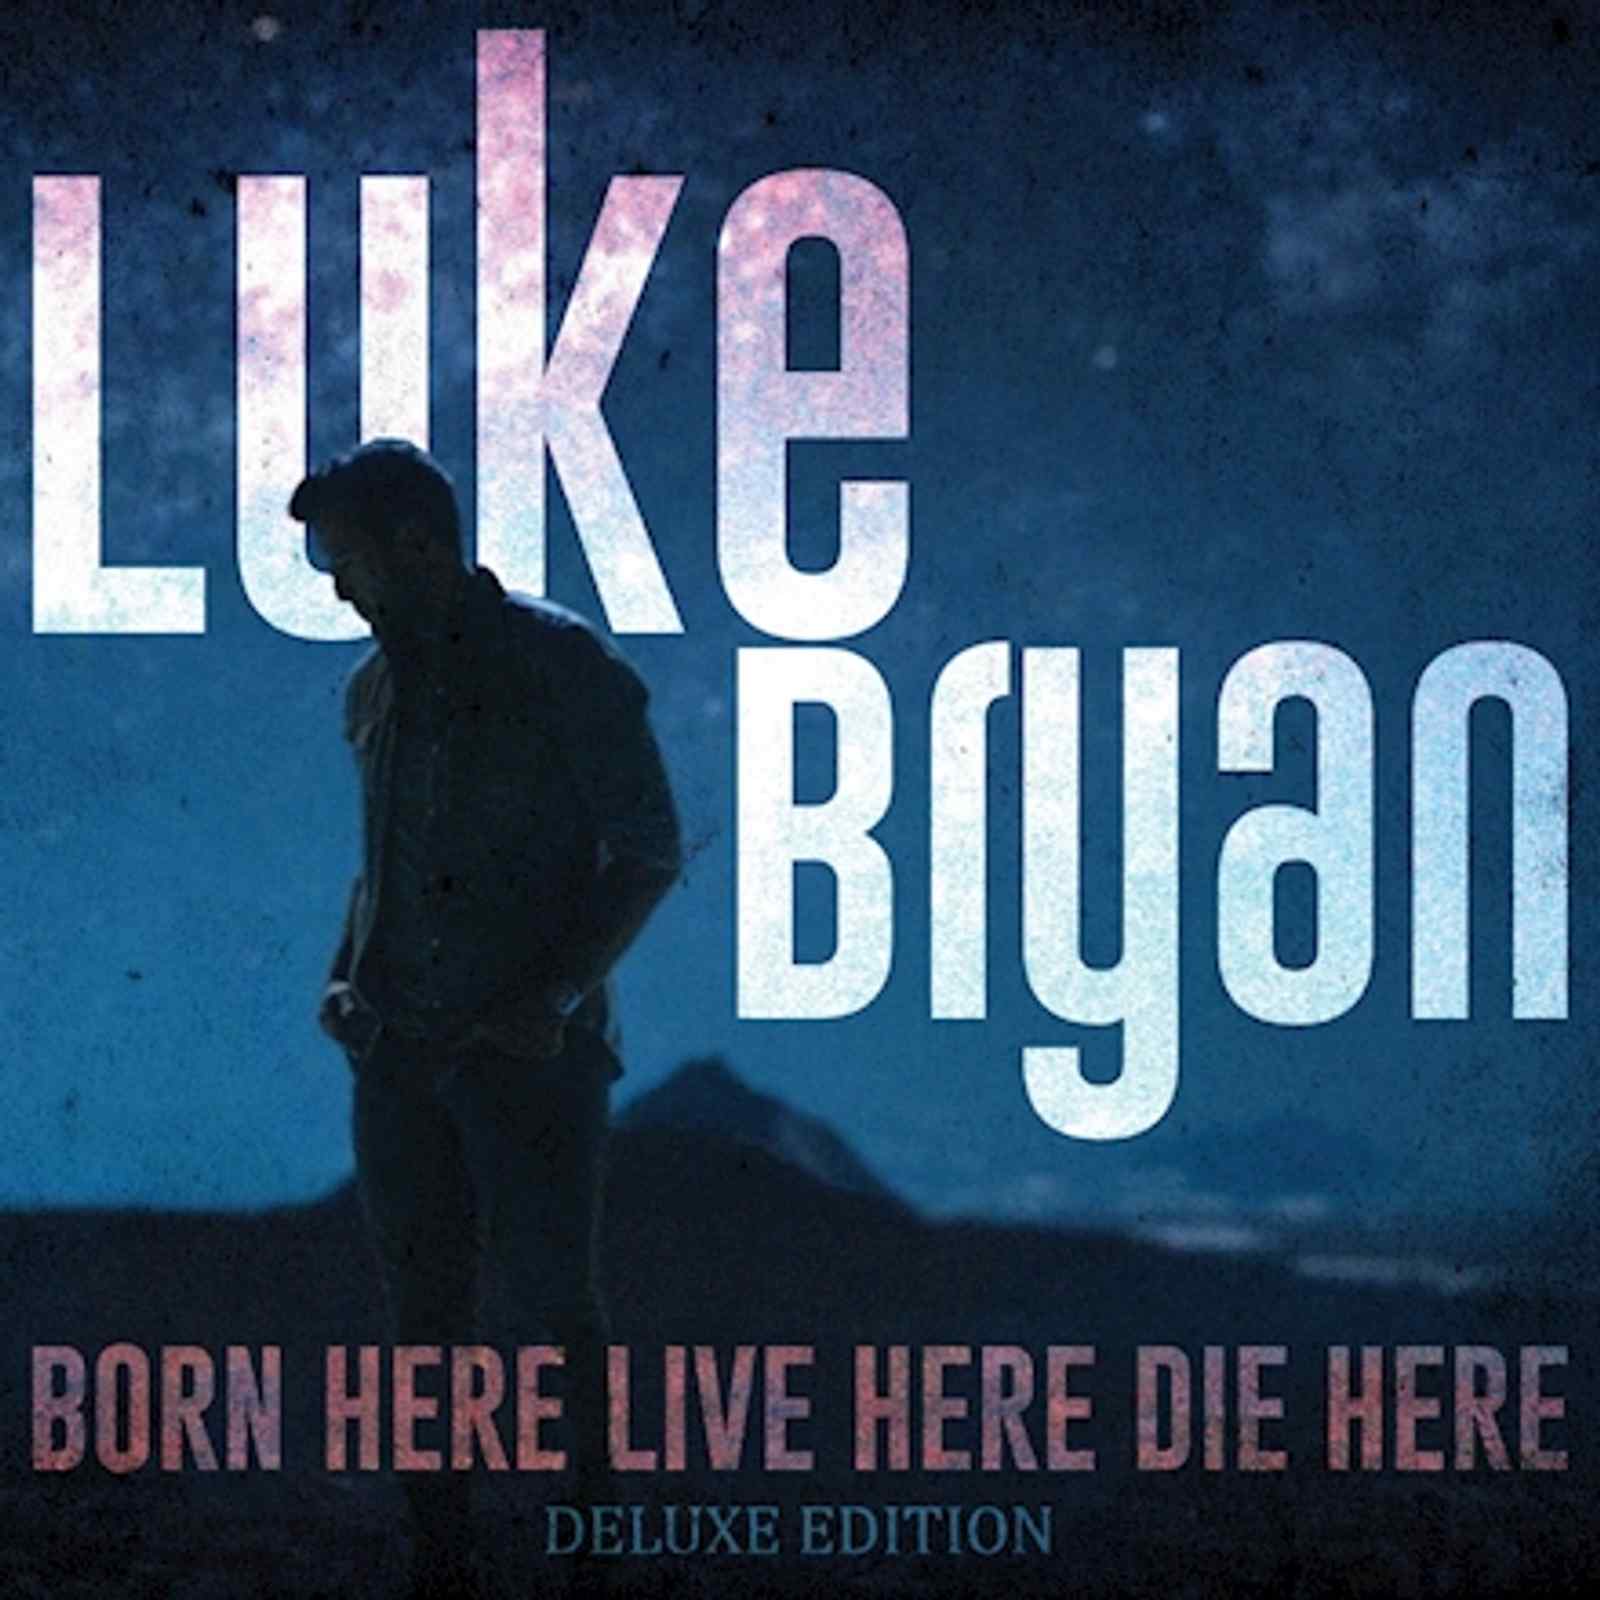 Born Here Live Here Die Here (Deluxe Edition) by Luke Bryan